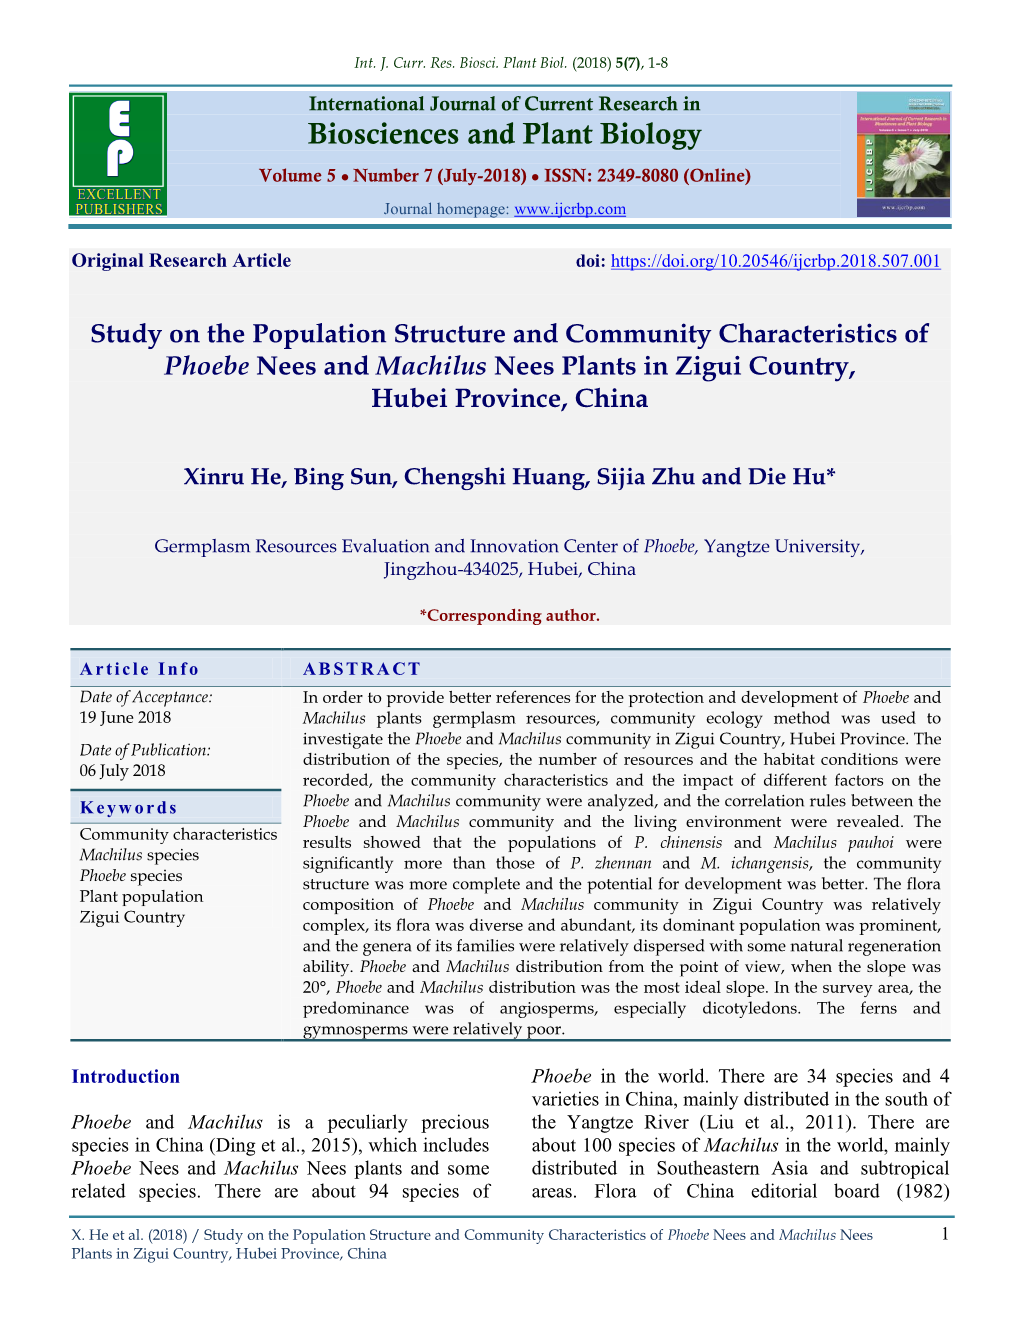 Study on the Population Structure and Community Characteristics of Phoebe Nees and Machilus Nees Plants in Zigui Country, Hubei Province, China